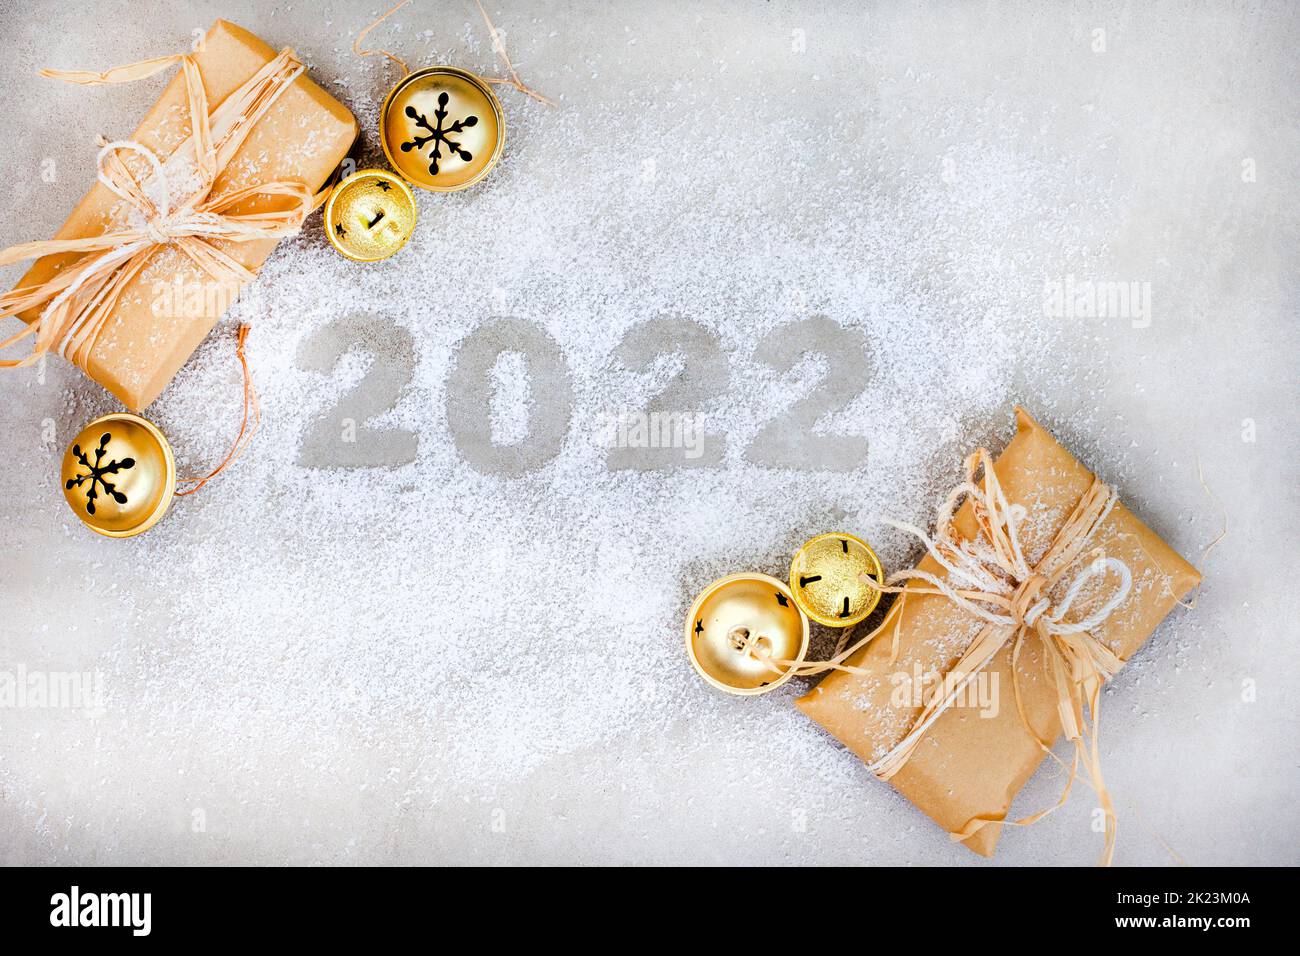 Festive season 2022 on grey with snow and rustic décor Stock Photo